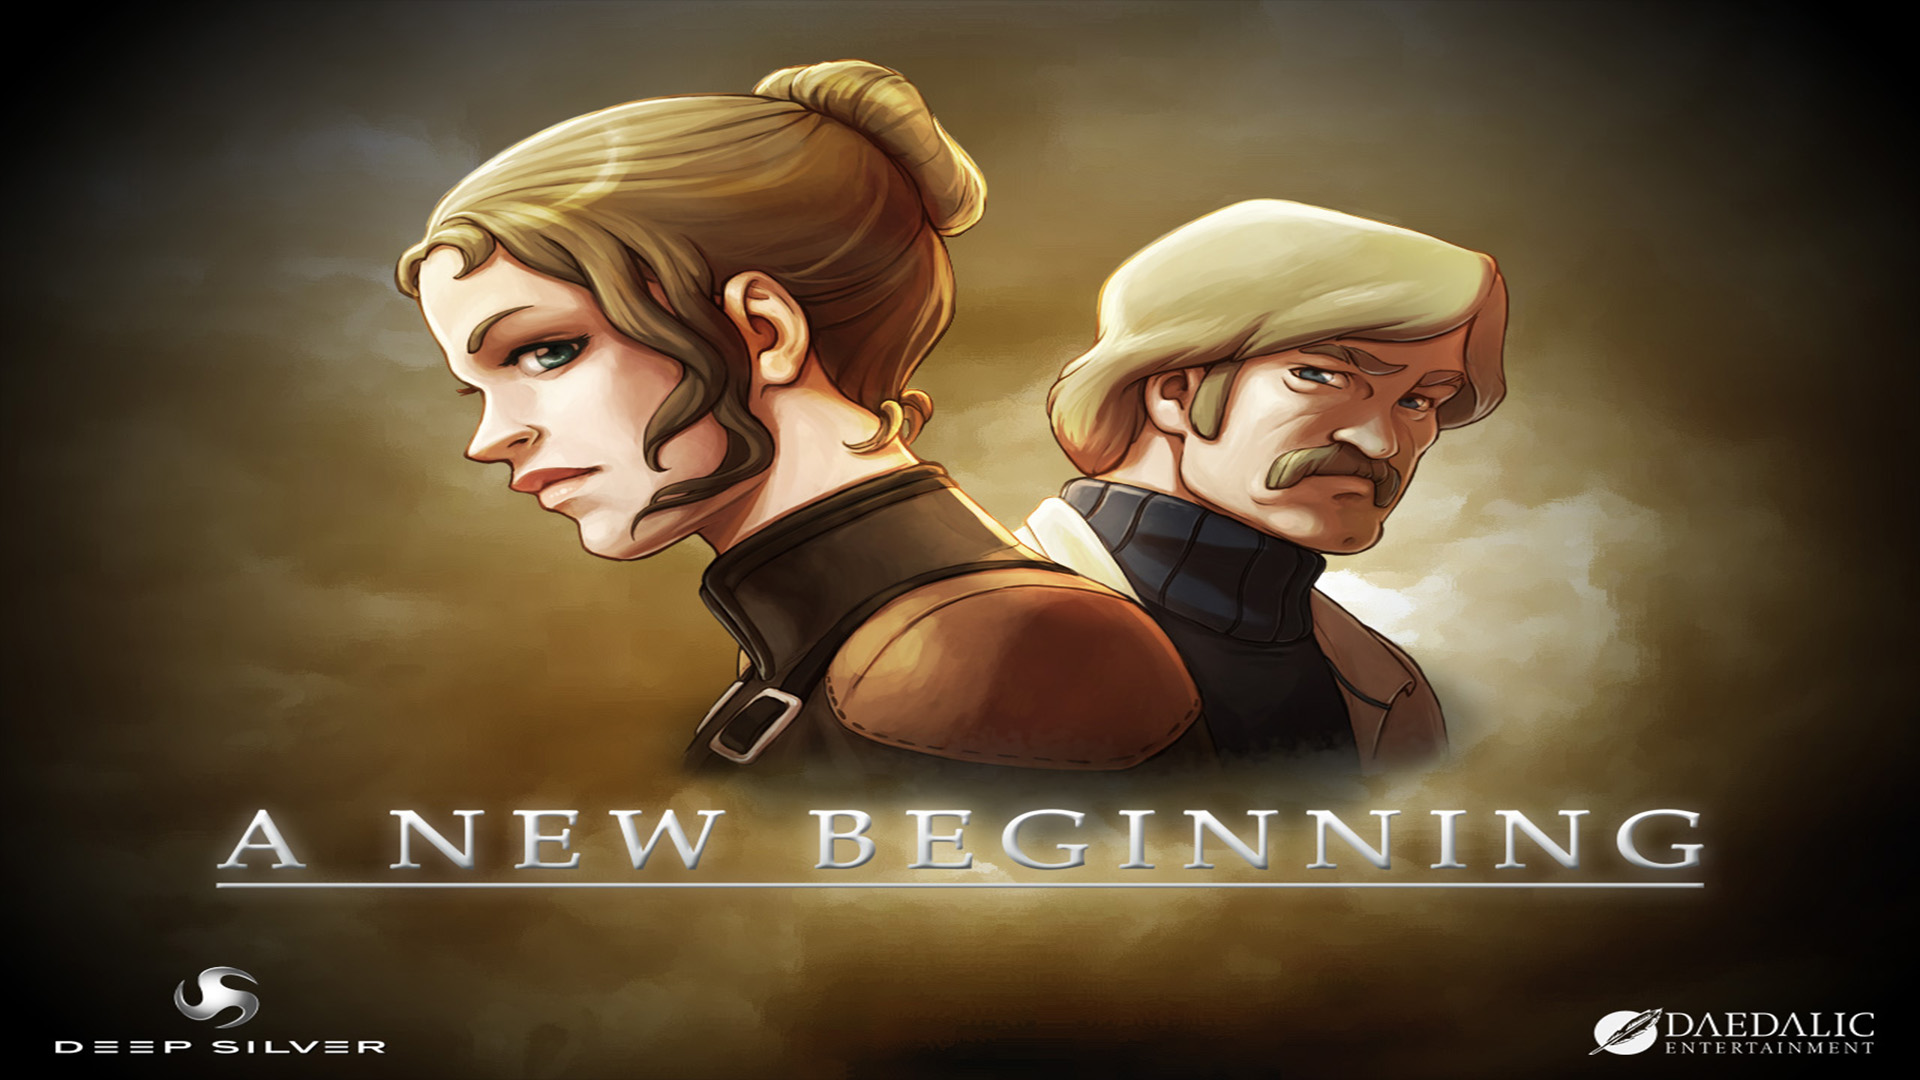 Video Game A New Beginning HD Wallpaper | Background Image